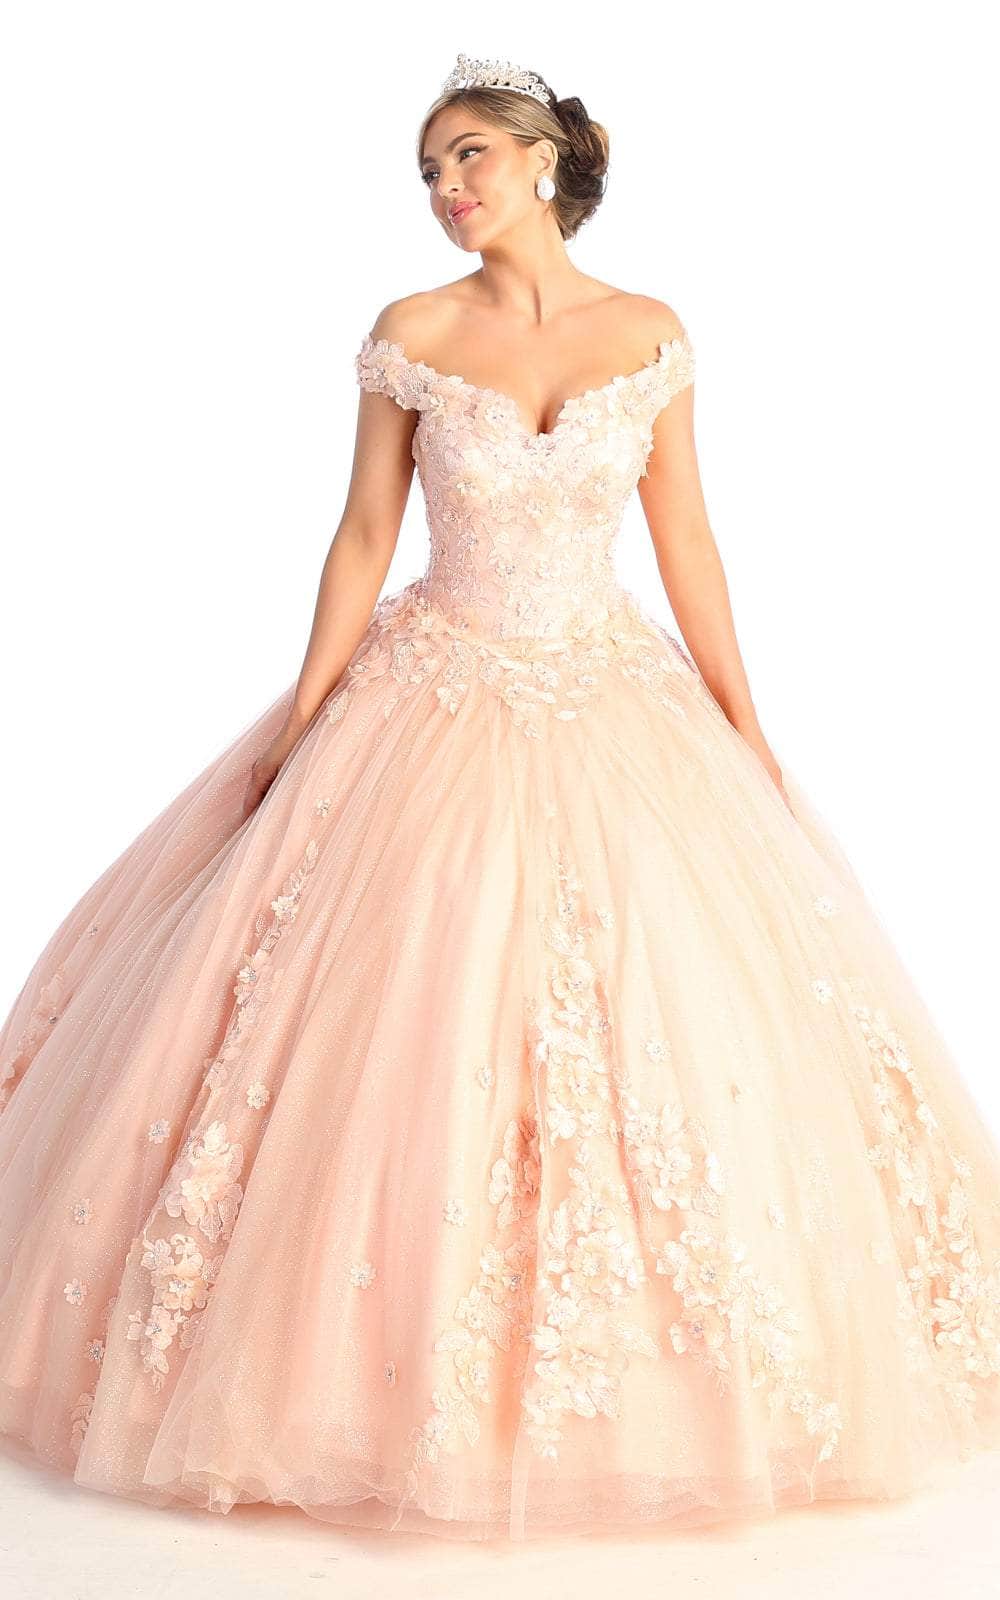 Image of May Queen LK160 - 3D Floral Appliques Sweetheart Ball gown